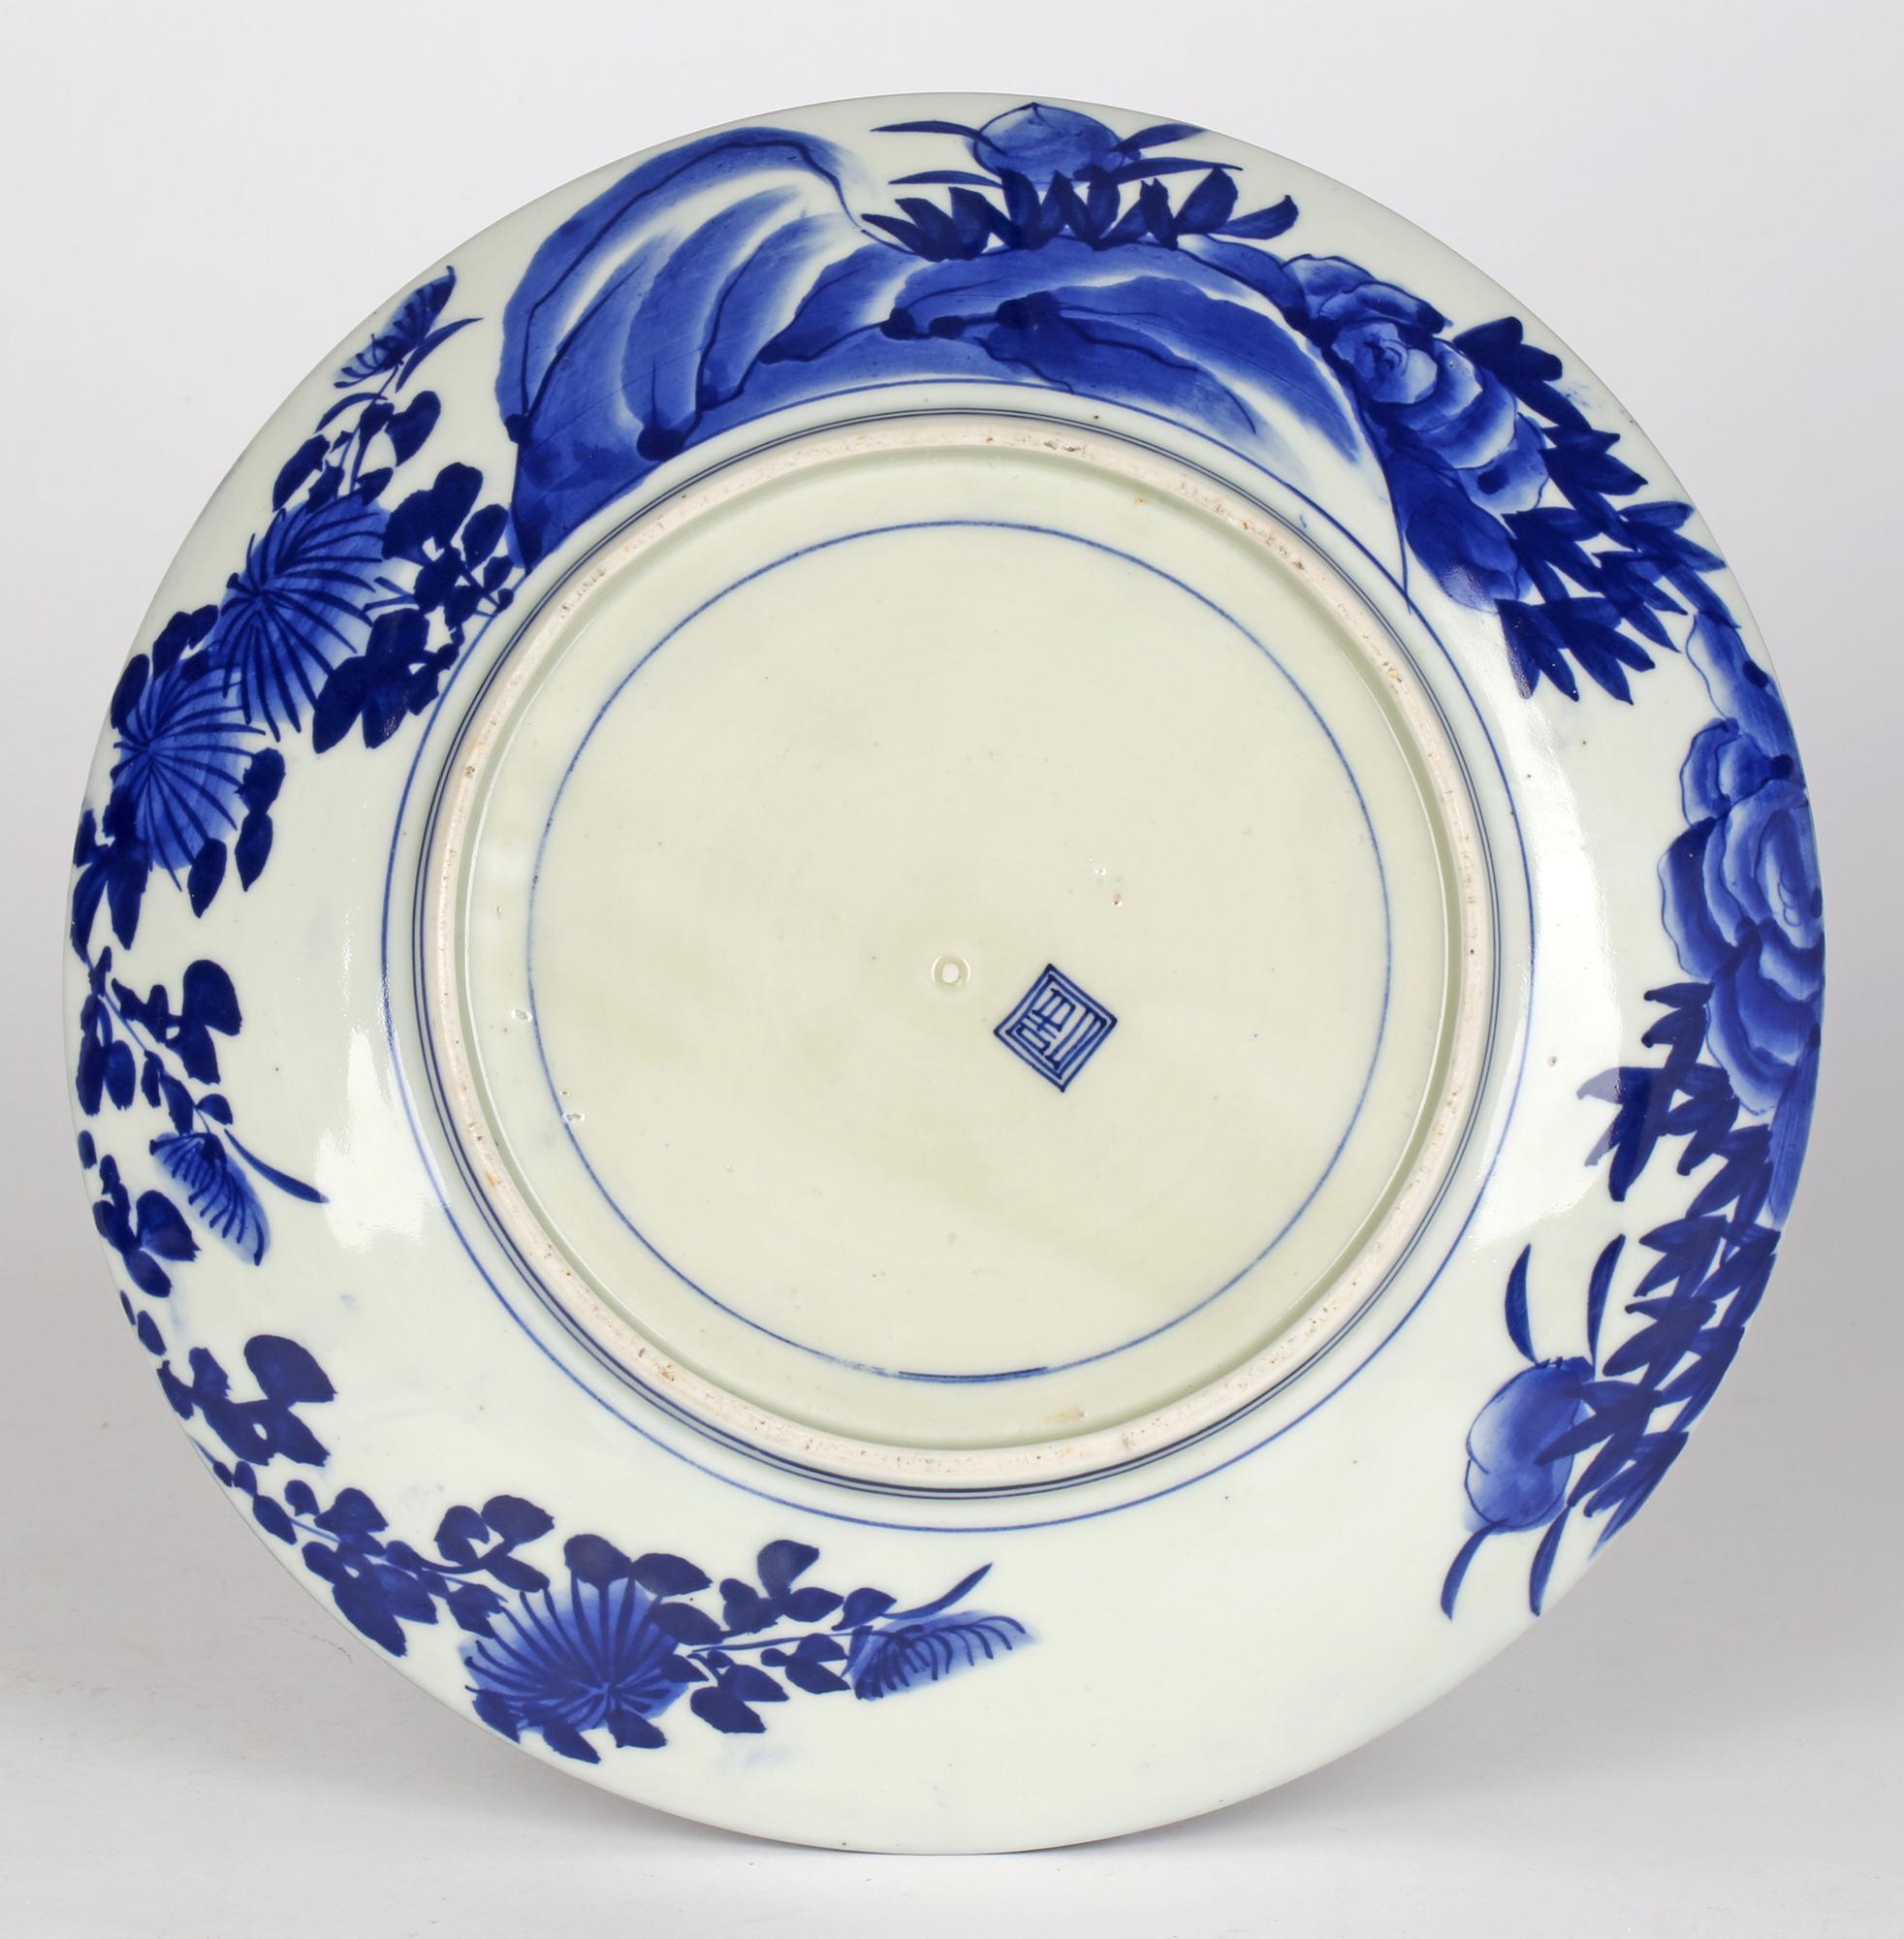 19th Century Japanese Meiji Blue & White Landscape with Bird Painted Porcelain Plate